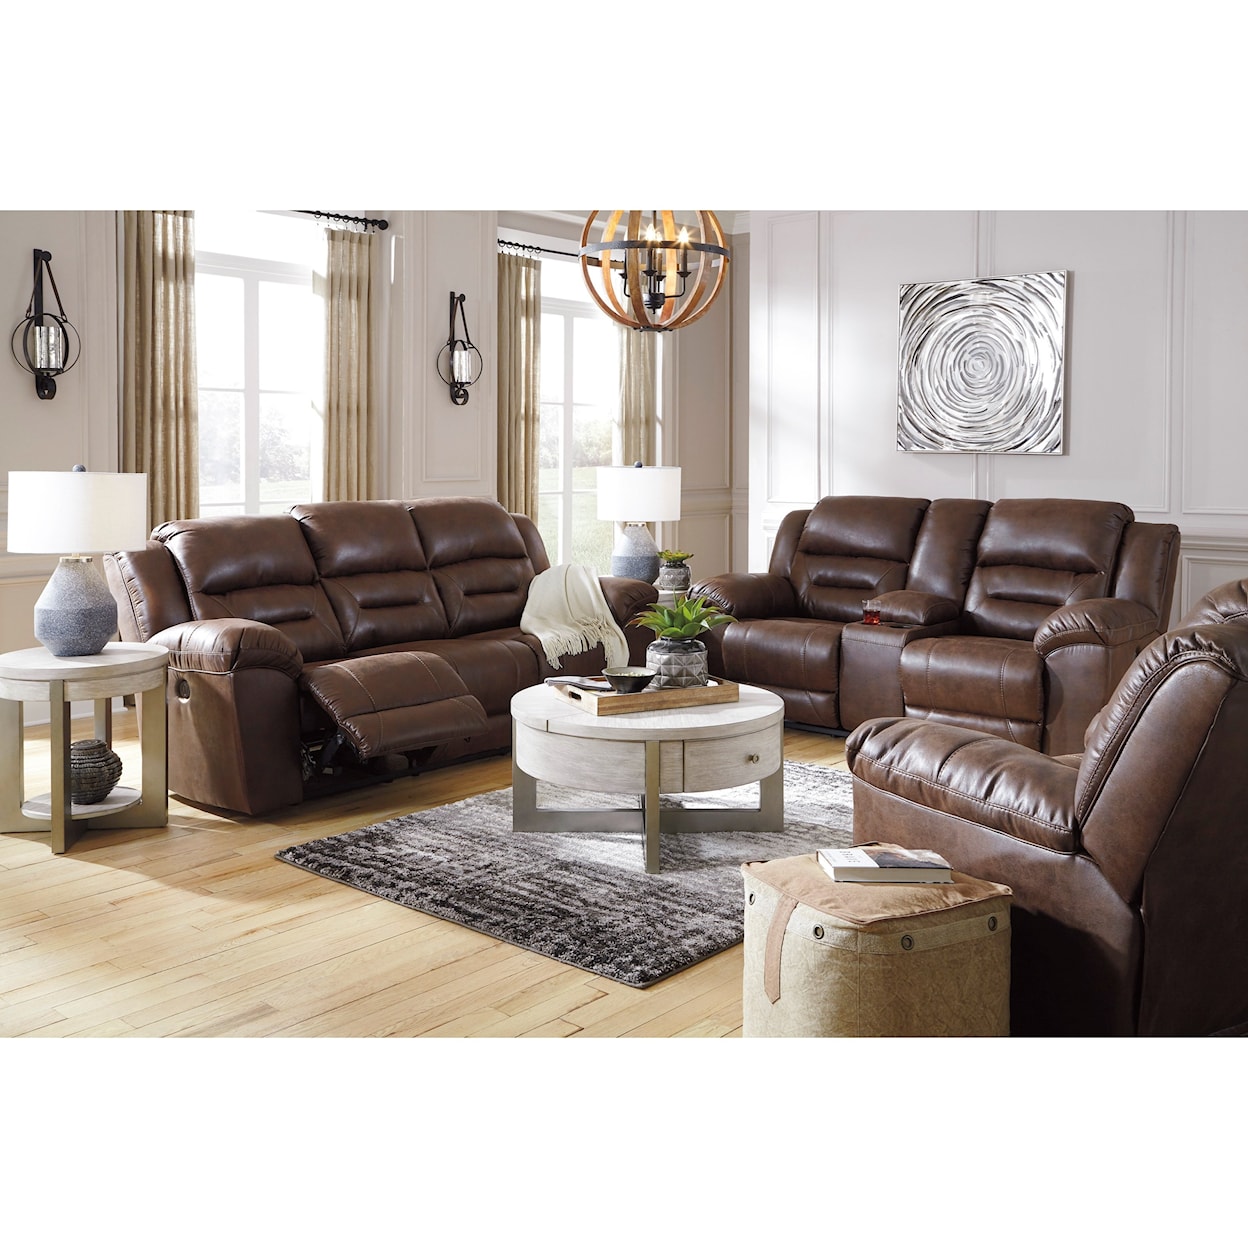 Signature Design by Ashley Stoneland Power Reclining Living Room Group